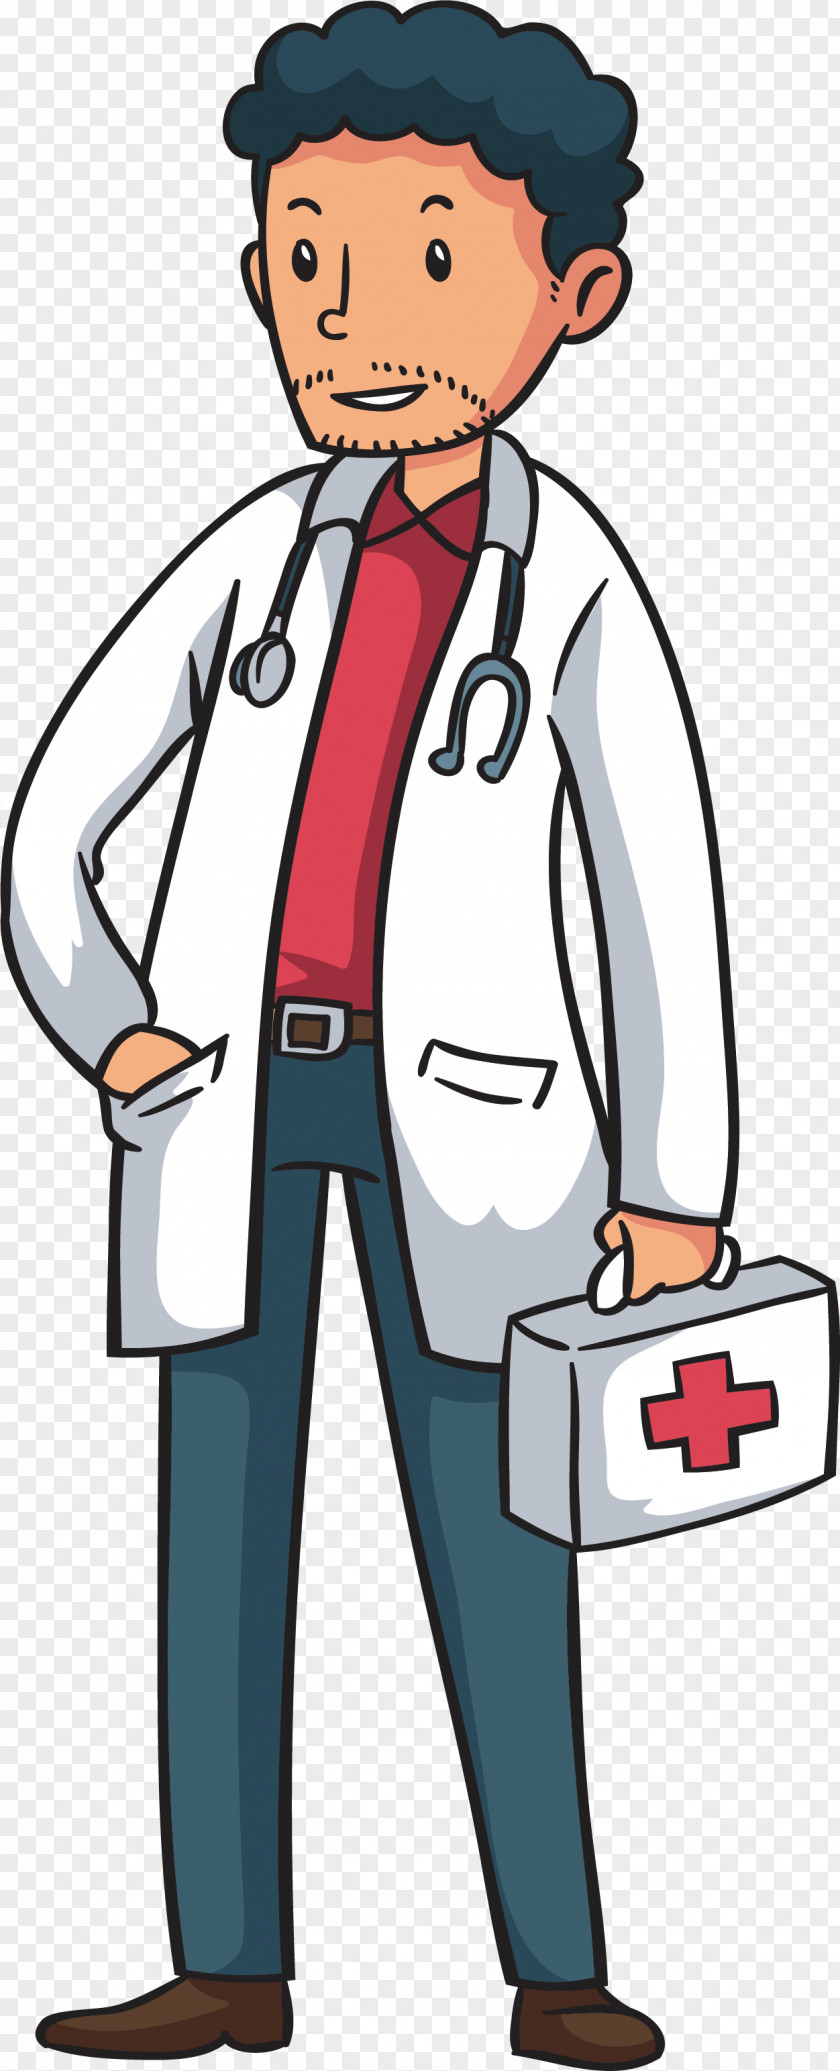 The Man With First Aid Kit Clip Art PNG